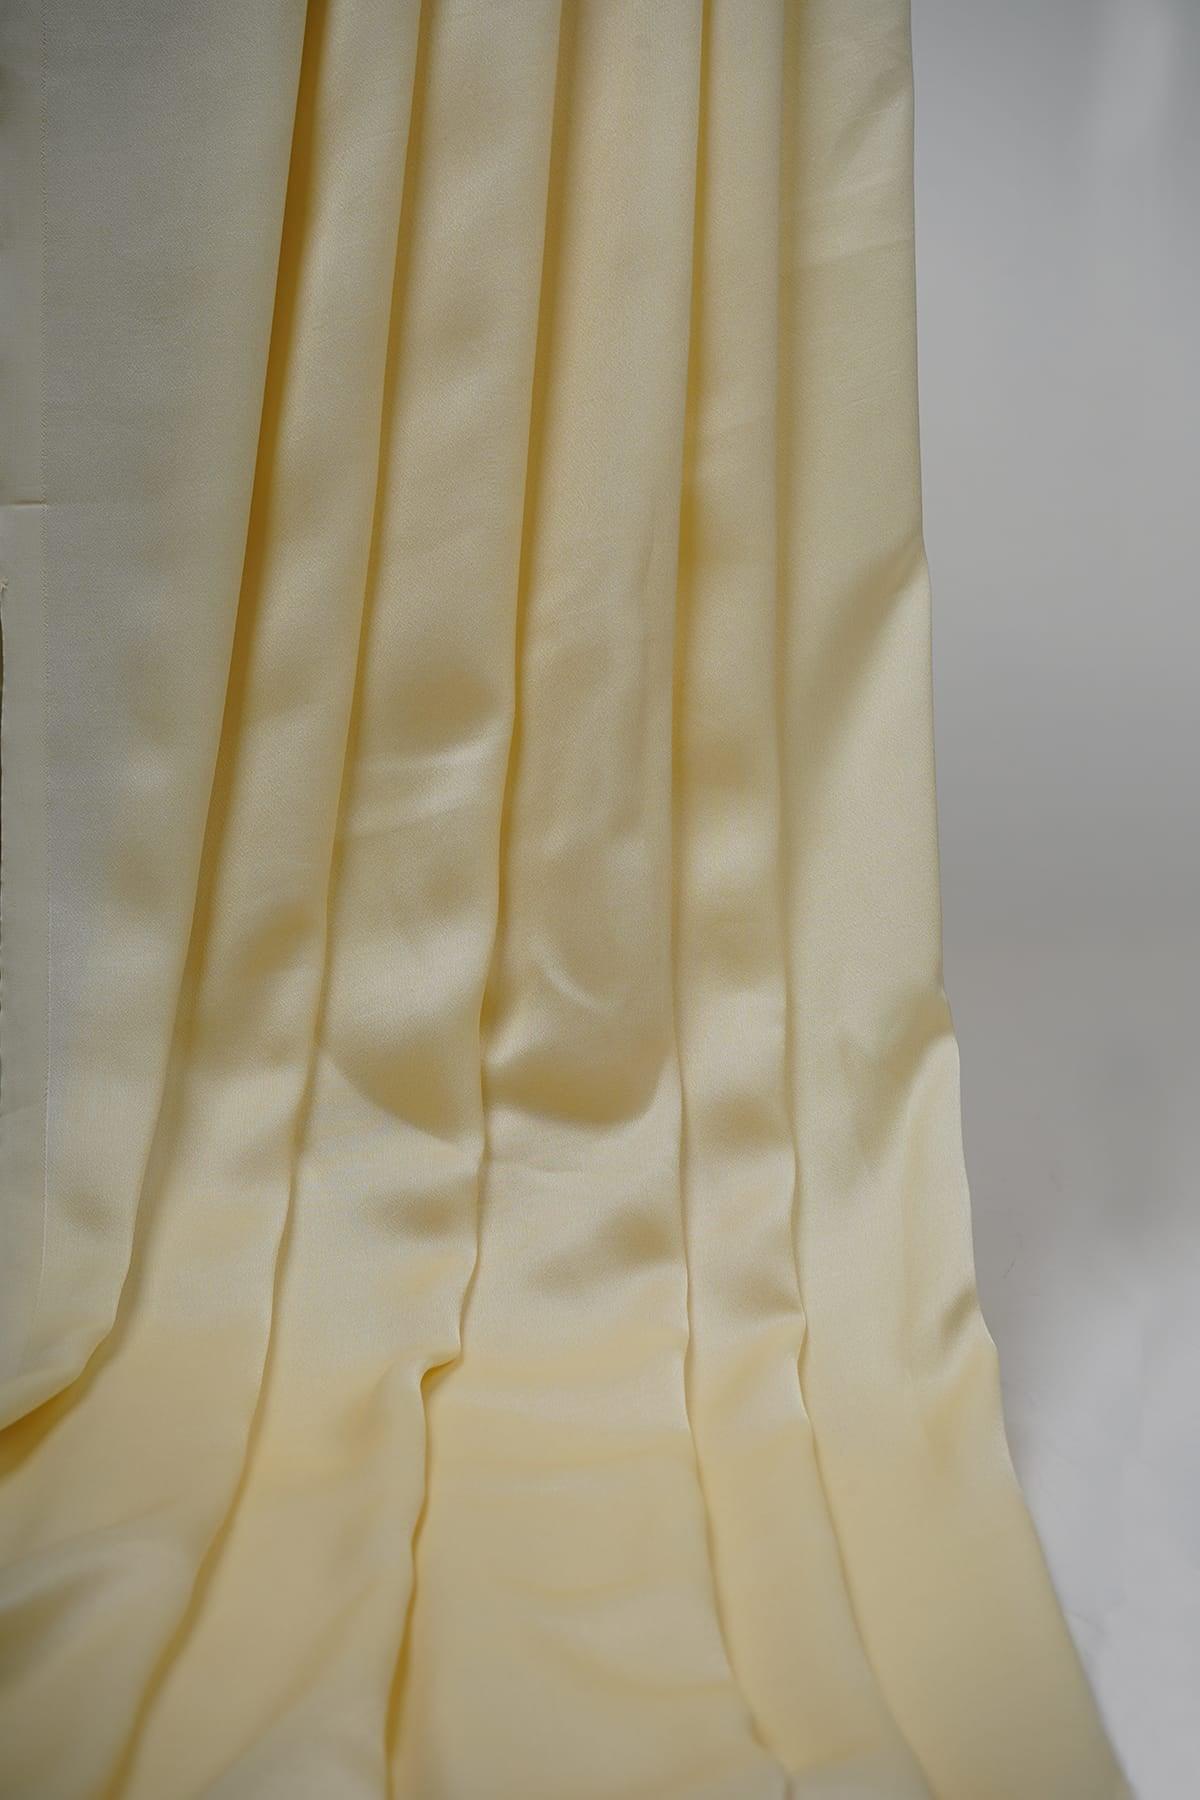 Plain Dyed Stella Satin - saraaha.com - Accessories, Blouses, Chic, Crafts, Cushion Covers, Decor, Drapable, Dresses, Durable, Evening Gowns, Festive Wear, Formal Wear, Indo Western, Kurti, Lustrous, Plain dyed, Polyester, royal, Sarees, Satin, Scruchies, Shiny, Shirts, Skirts, Sleep caps, Soft, Traditional Lehengas, Wide Color Variety, women wear